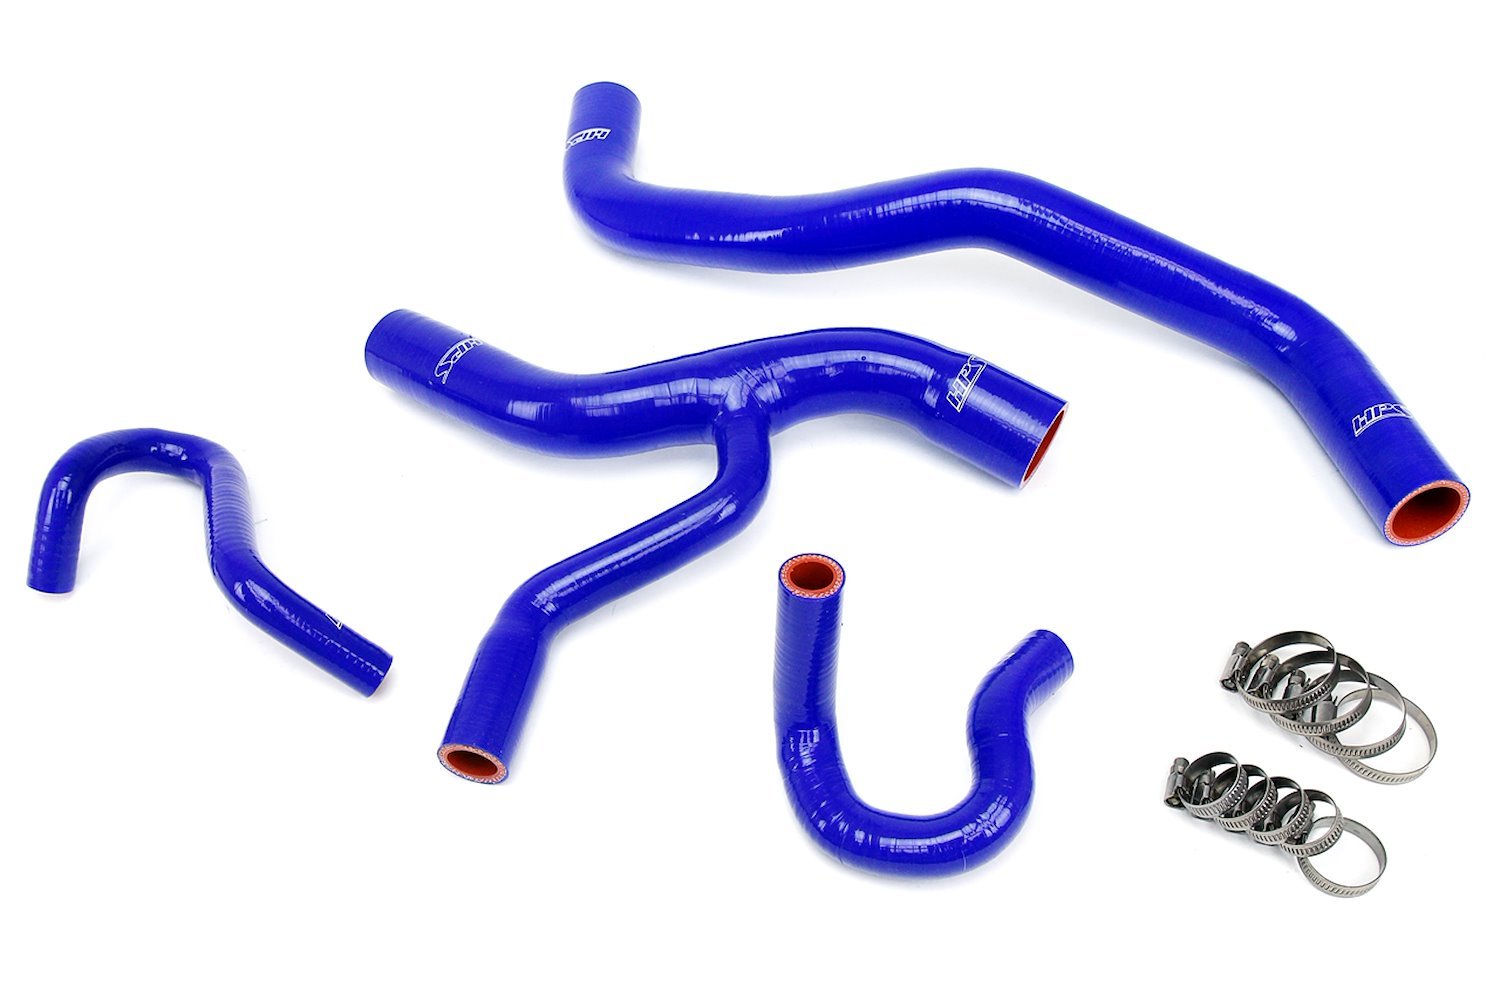 57-1416-BLUE Coolant Hose Kit, High-Temp 3-Ply Reinforced Silicone, Replace Rubber Radiator Heater Coolant Hoses